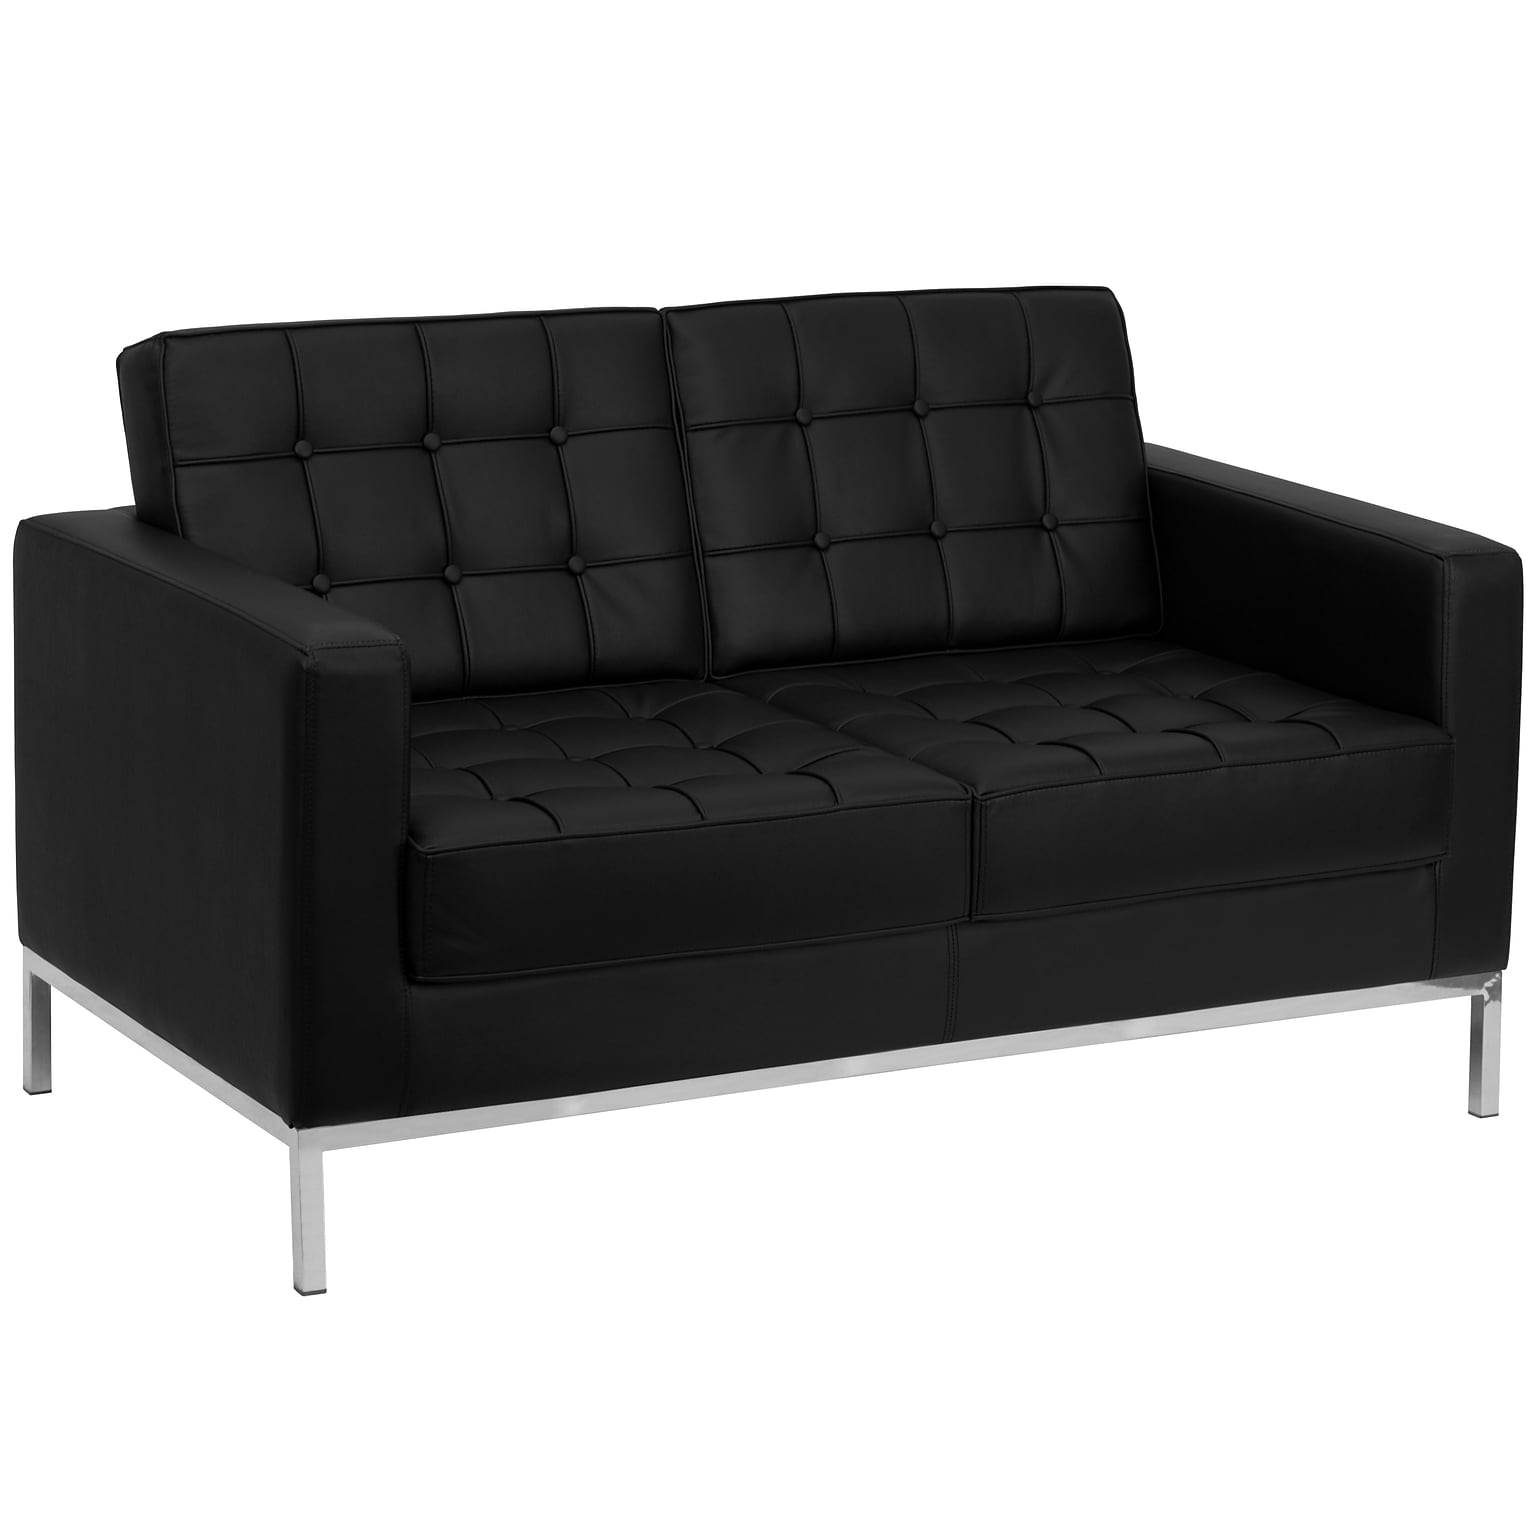 Flash Furniture HERCULES Lacey Series 57 LeatherSoft Loveseat with Stainless Steel Frame, Black (ZBLACEY8312LSBK)